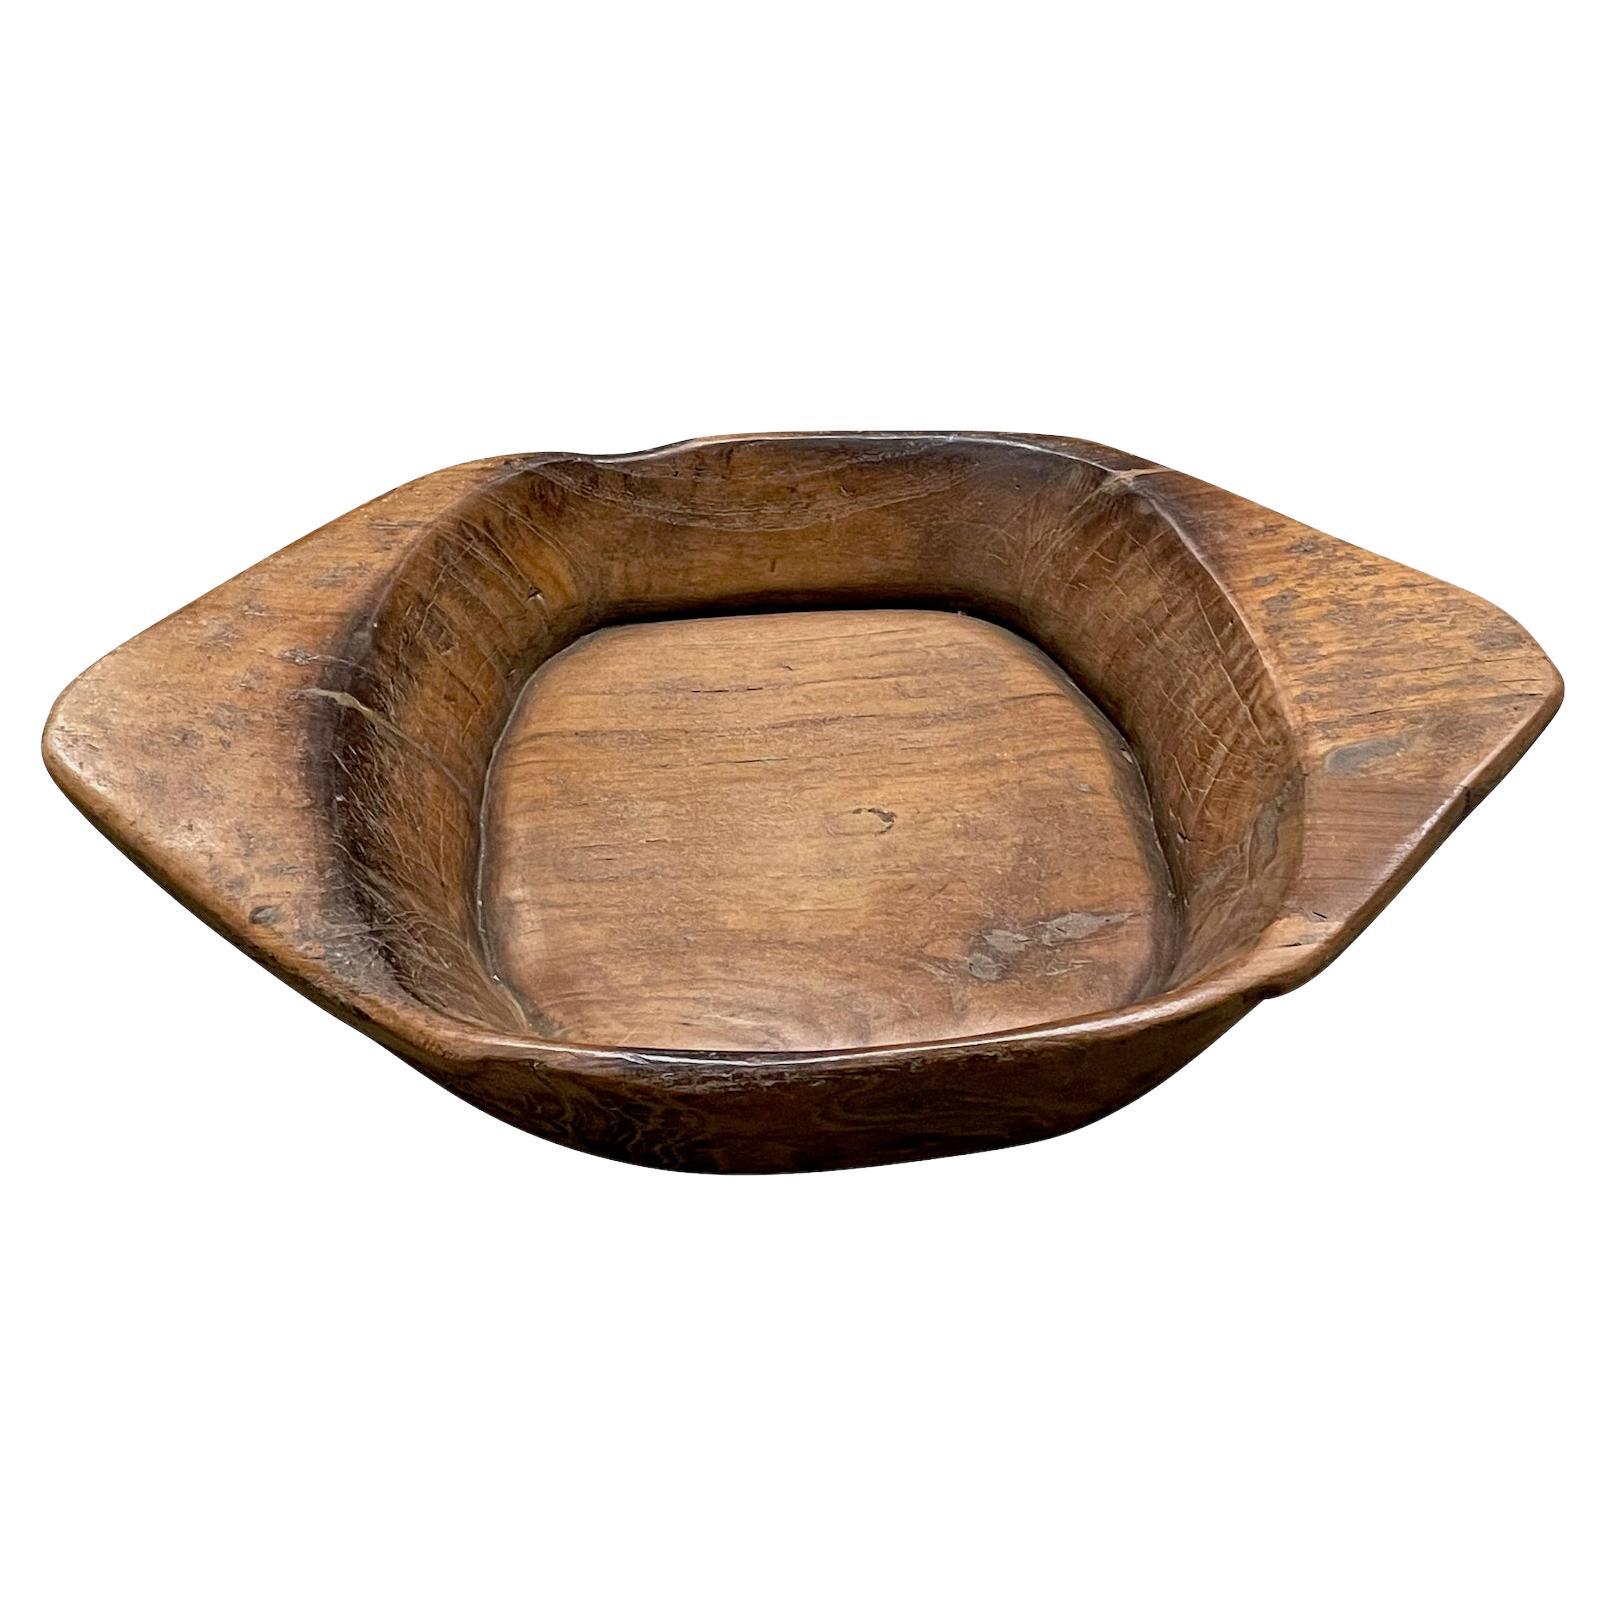 Teak Wood Two Handled Tray, China, 1950s For Sale